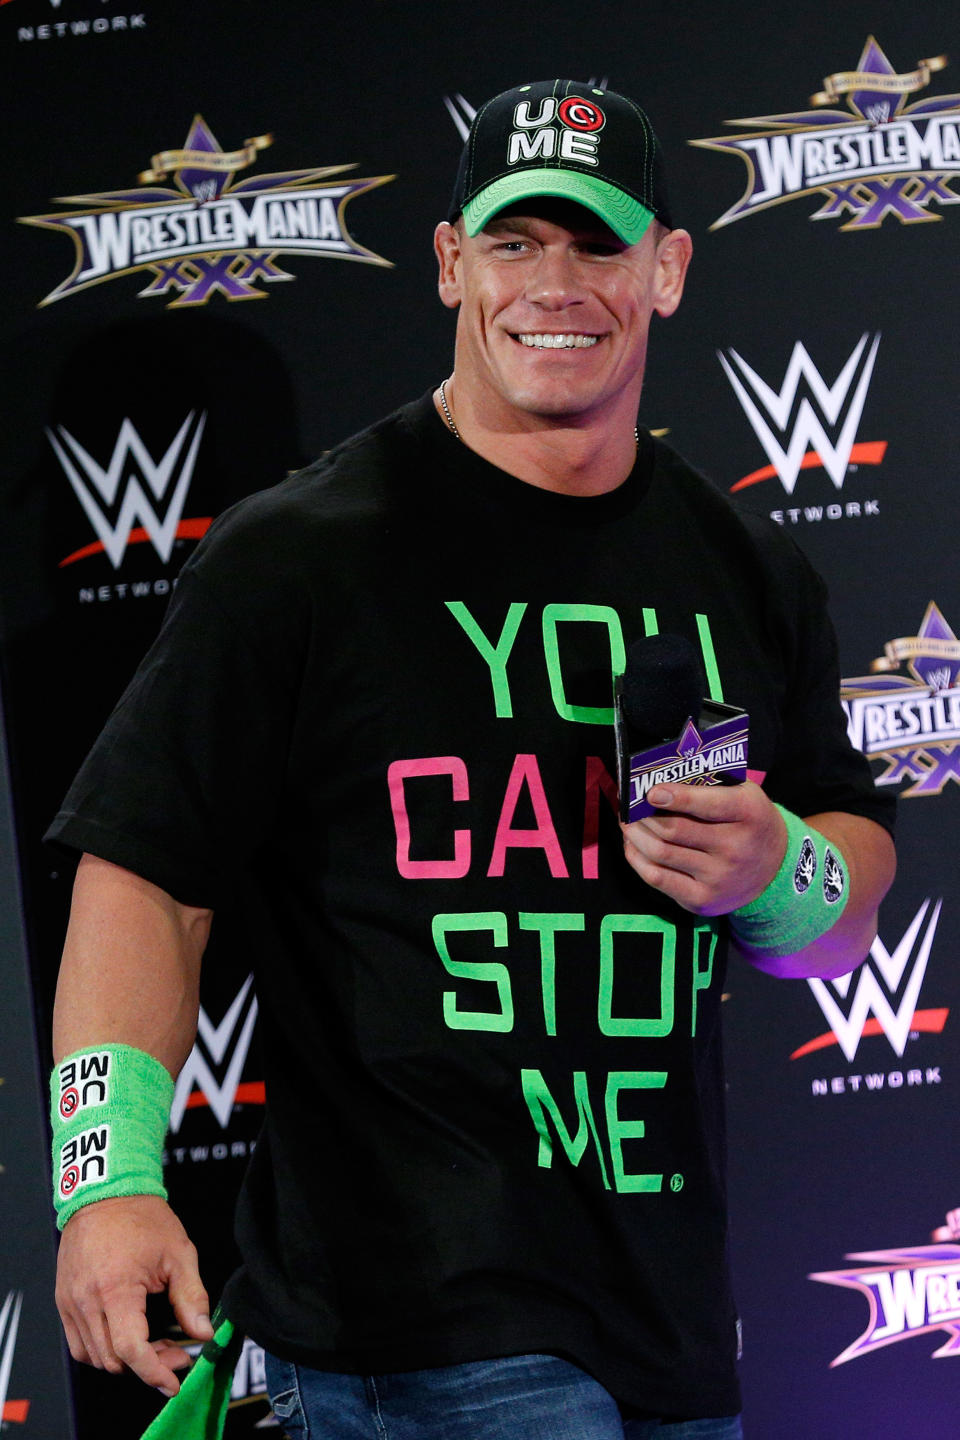 John Cena speaks during a news conference before Wrestlemania XXX at the Mercedes-Benz Super Dome in New Orleans on Sunday, April 6, 2014. (Jonathan Bachman/AP Images for WWE)